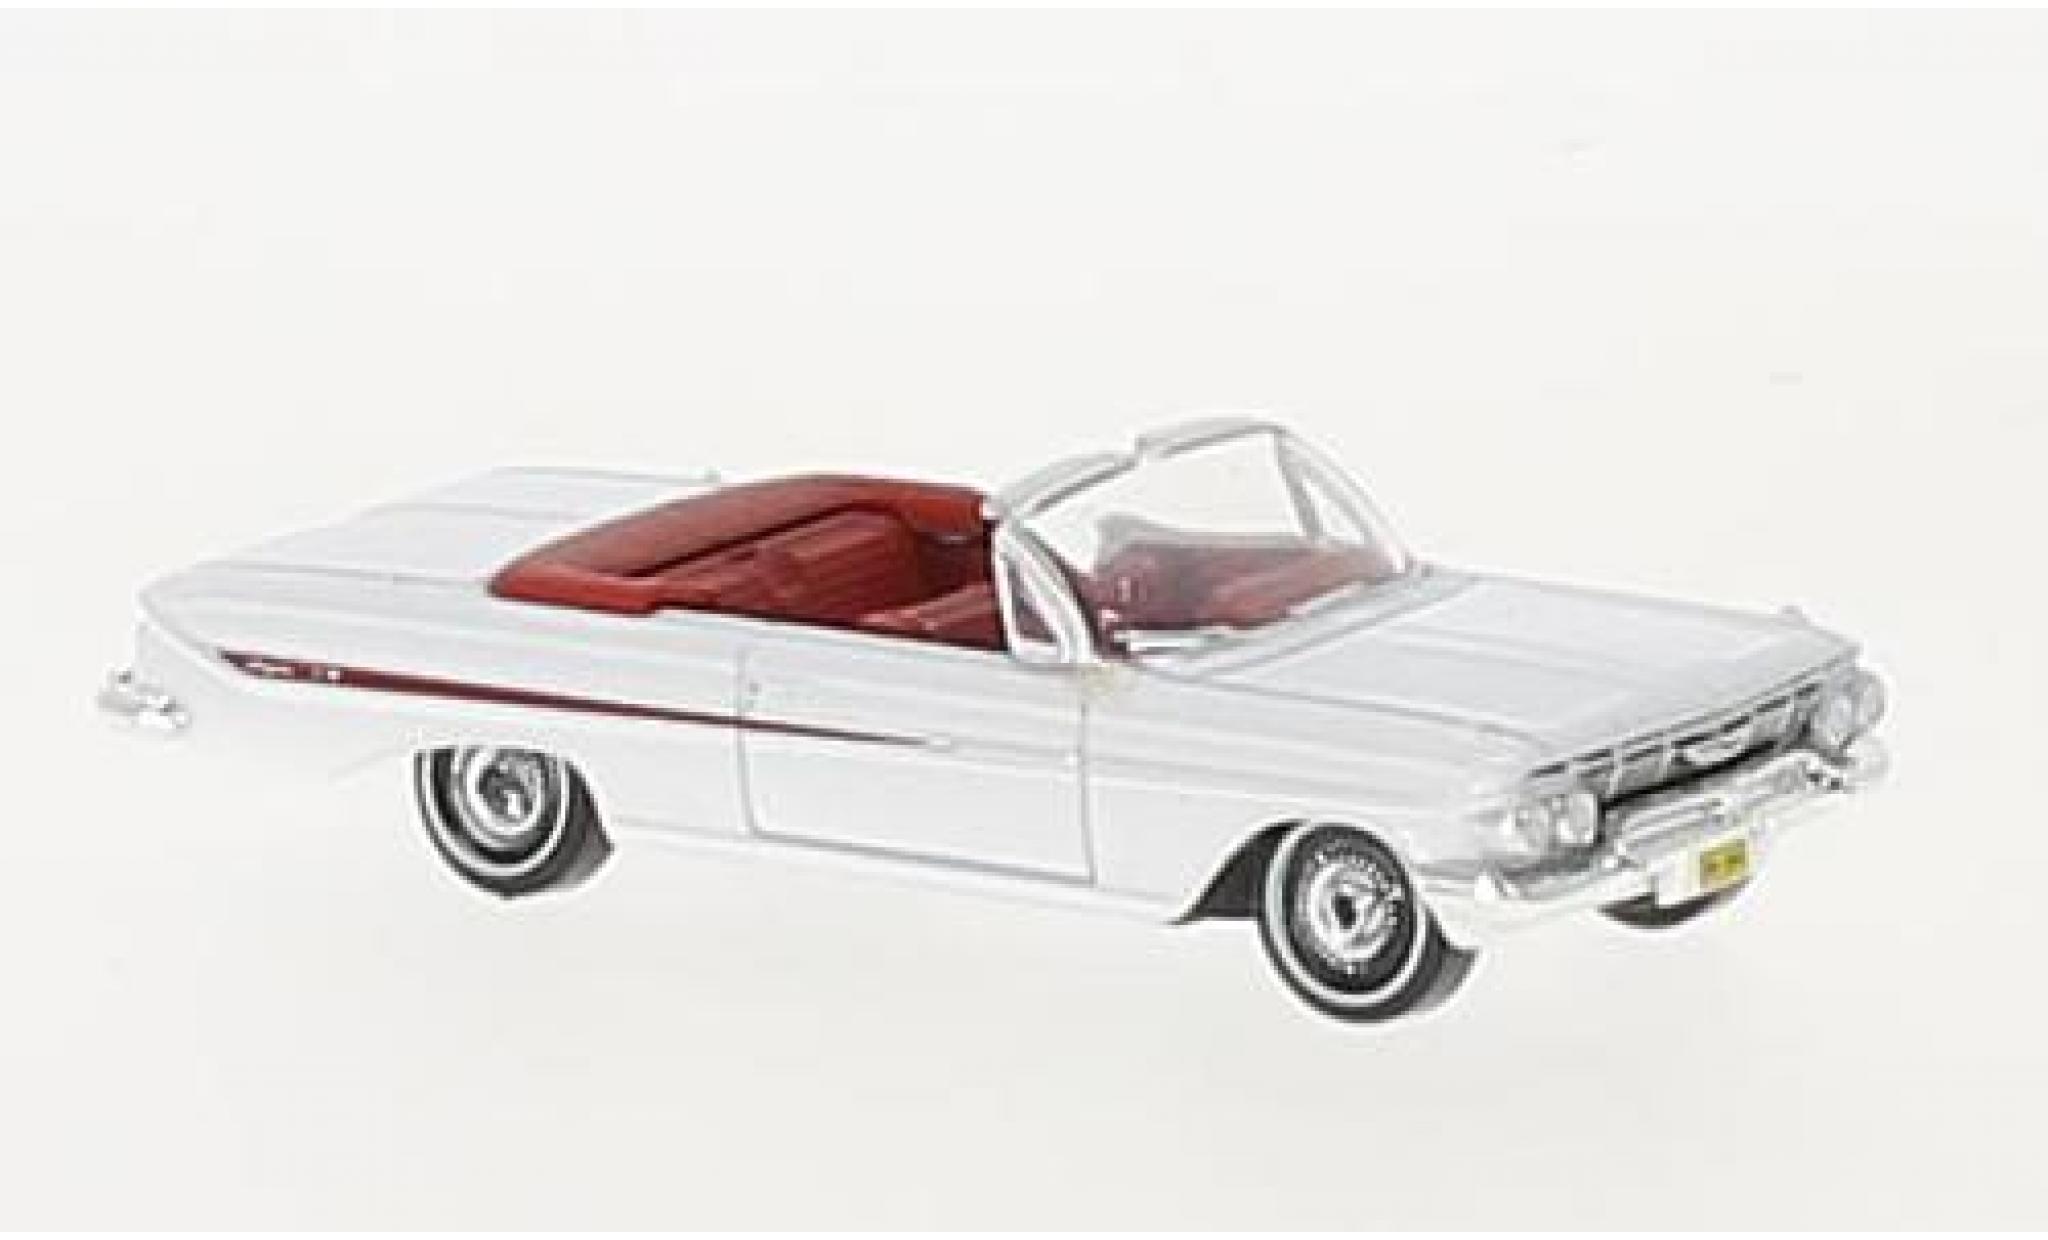 Oxford Diecast 1:87/HO Chevrolet Impala Convertible 1961 White/Red 87CI61003 